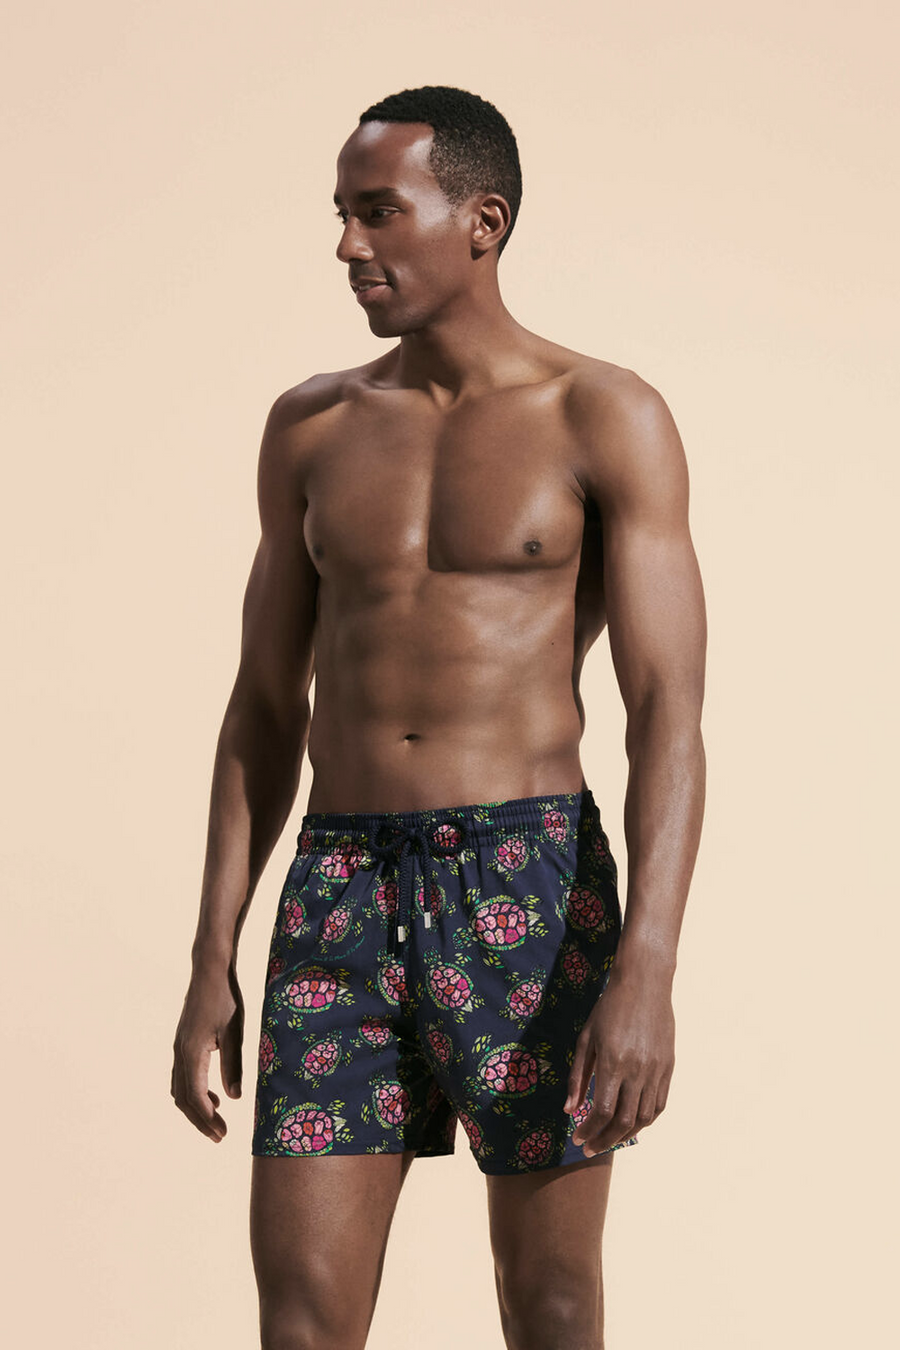 Buy the Vilebrequin Stretch Swimshorts Provencal Turtles in Navy at Intro. Spend £100 for free UK delivery. Official stockists. We ship worldwide.